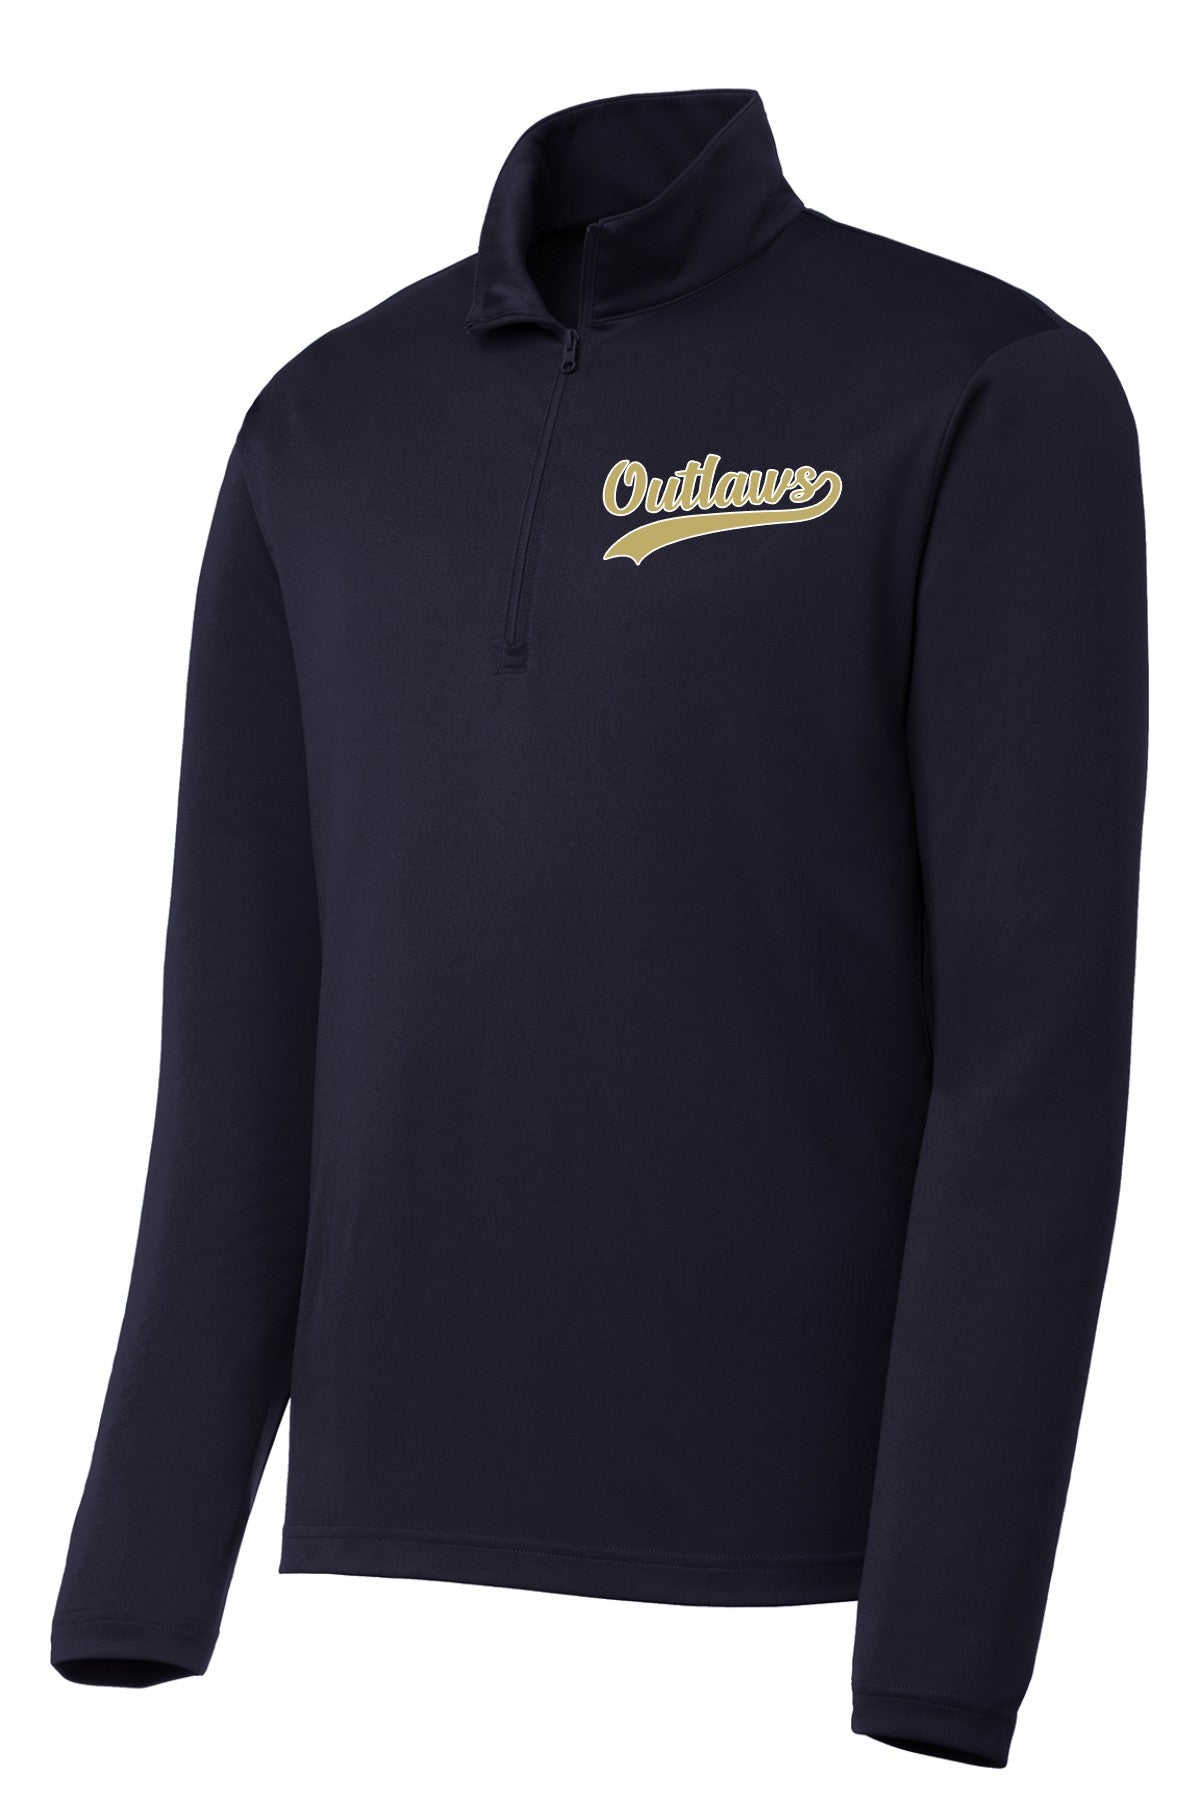 "Outlaws" Competitor Pullover